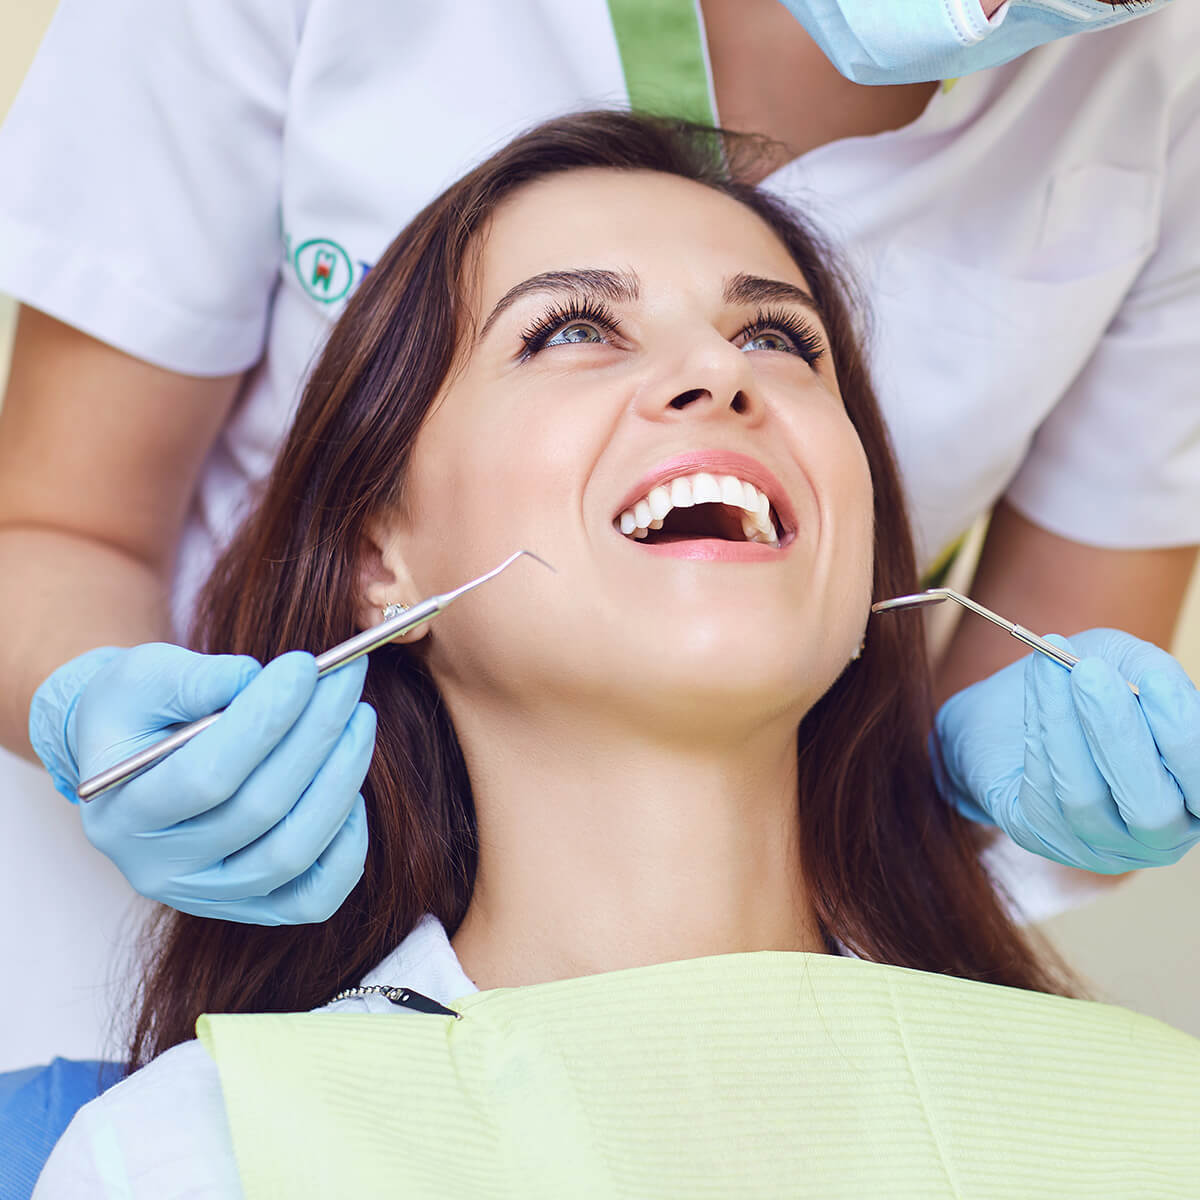 Root Canal Infection Surgery in San Antonio TX Area